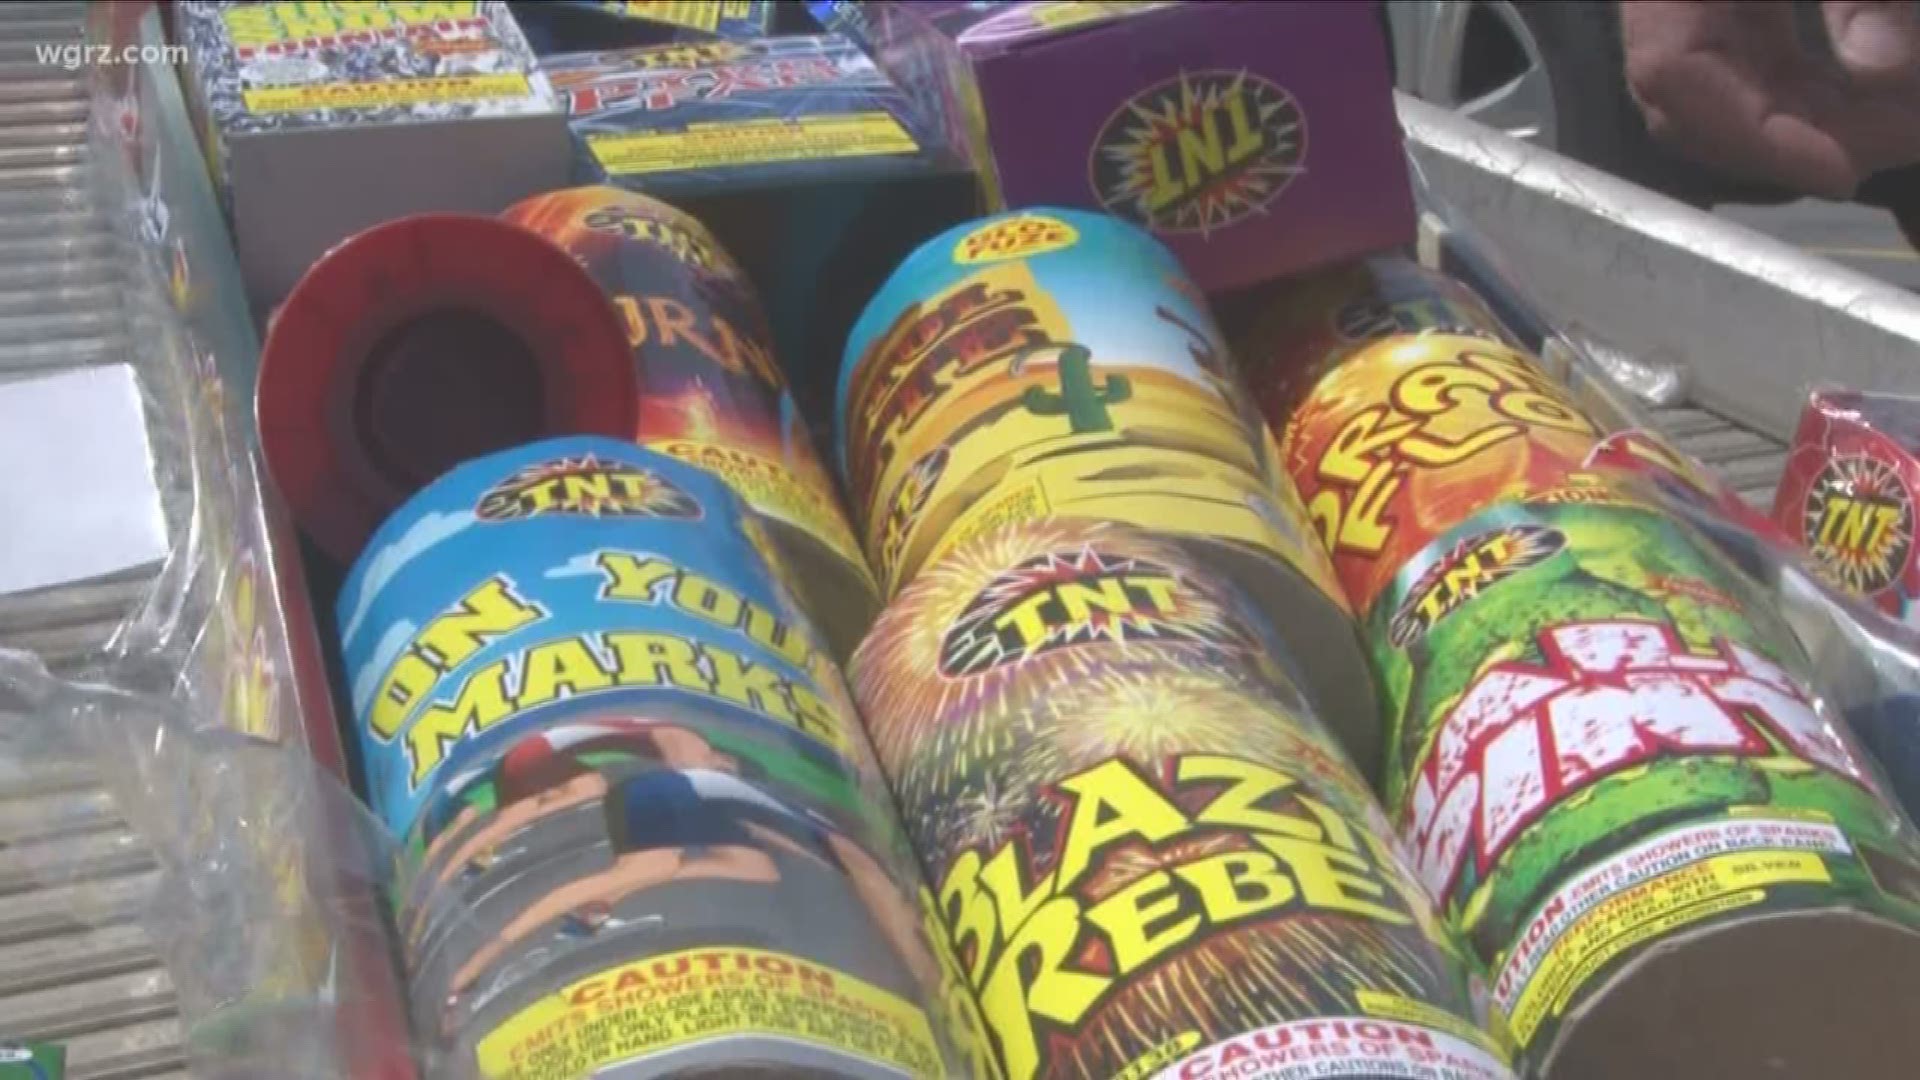 Firework laws have been confusing, to say the least, for Western New Yorkers. In 2017, three counties banned the sale and use of fireworks. But if those same counties are selling fireworks in 2018, does that mean they're legal this year?